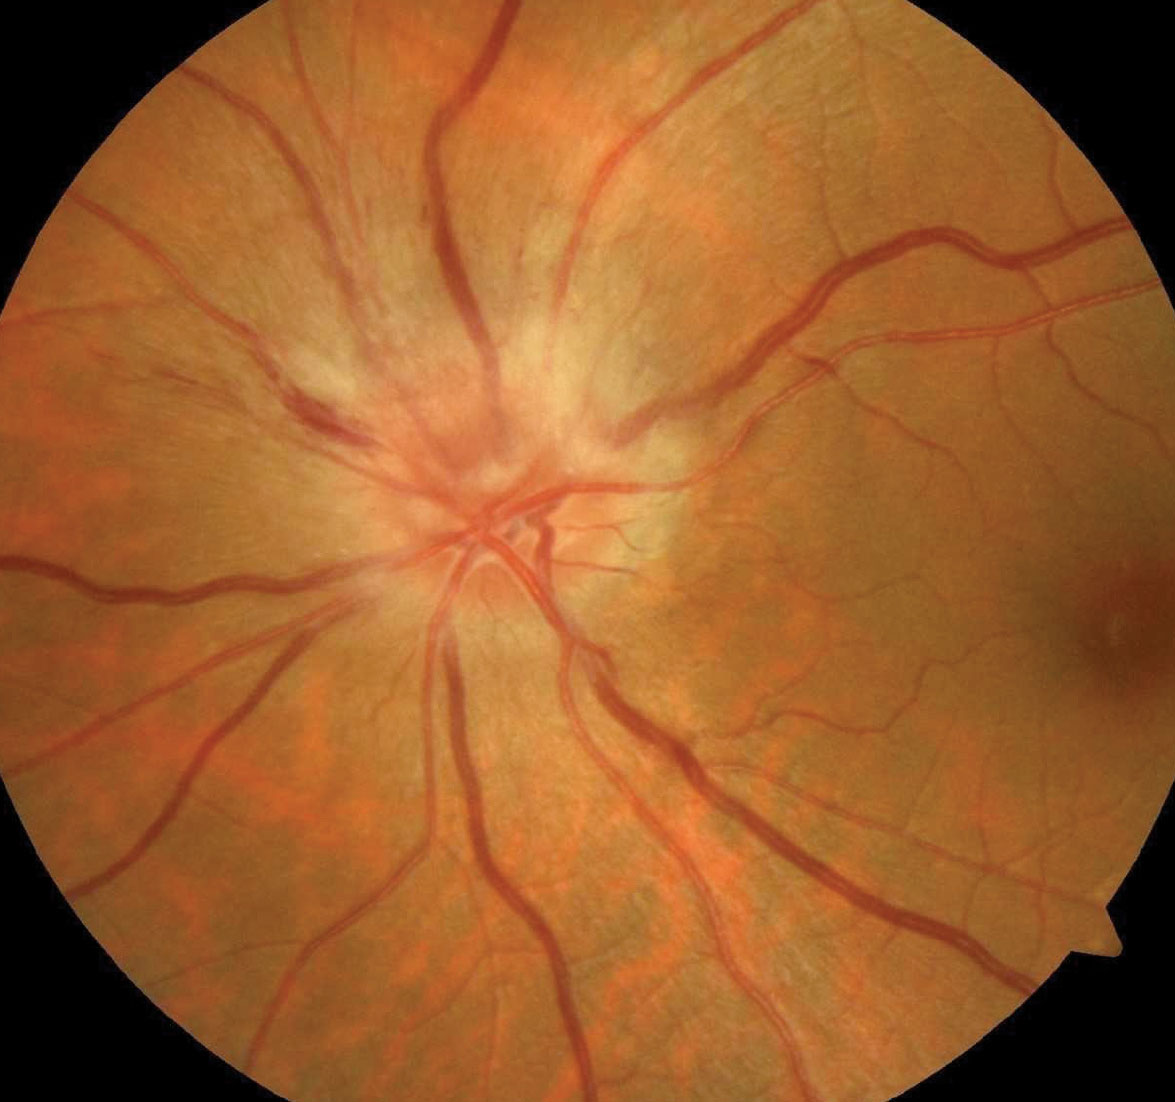 Nine out of 10 neuro-ophthalmologists responding to this survey recommended against treatment for NAION in most cases, though high-dose steroids were favored in some scenarios.